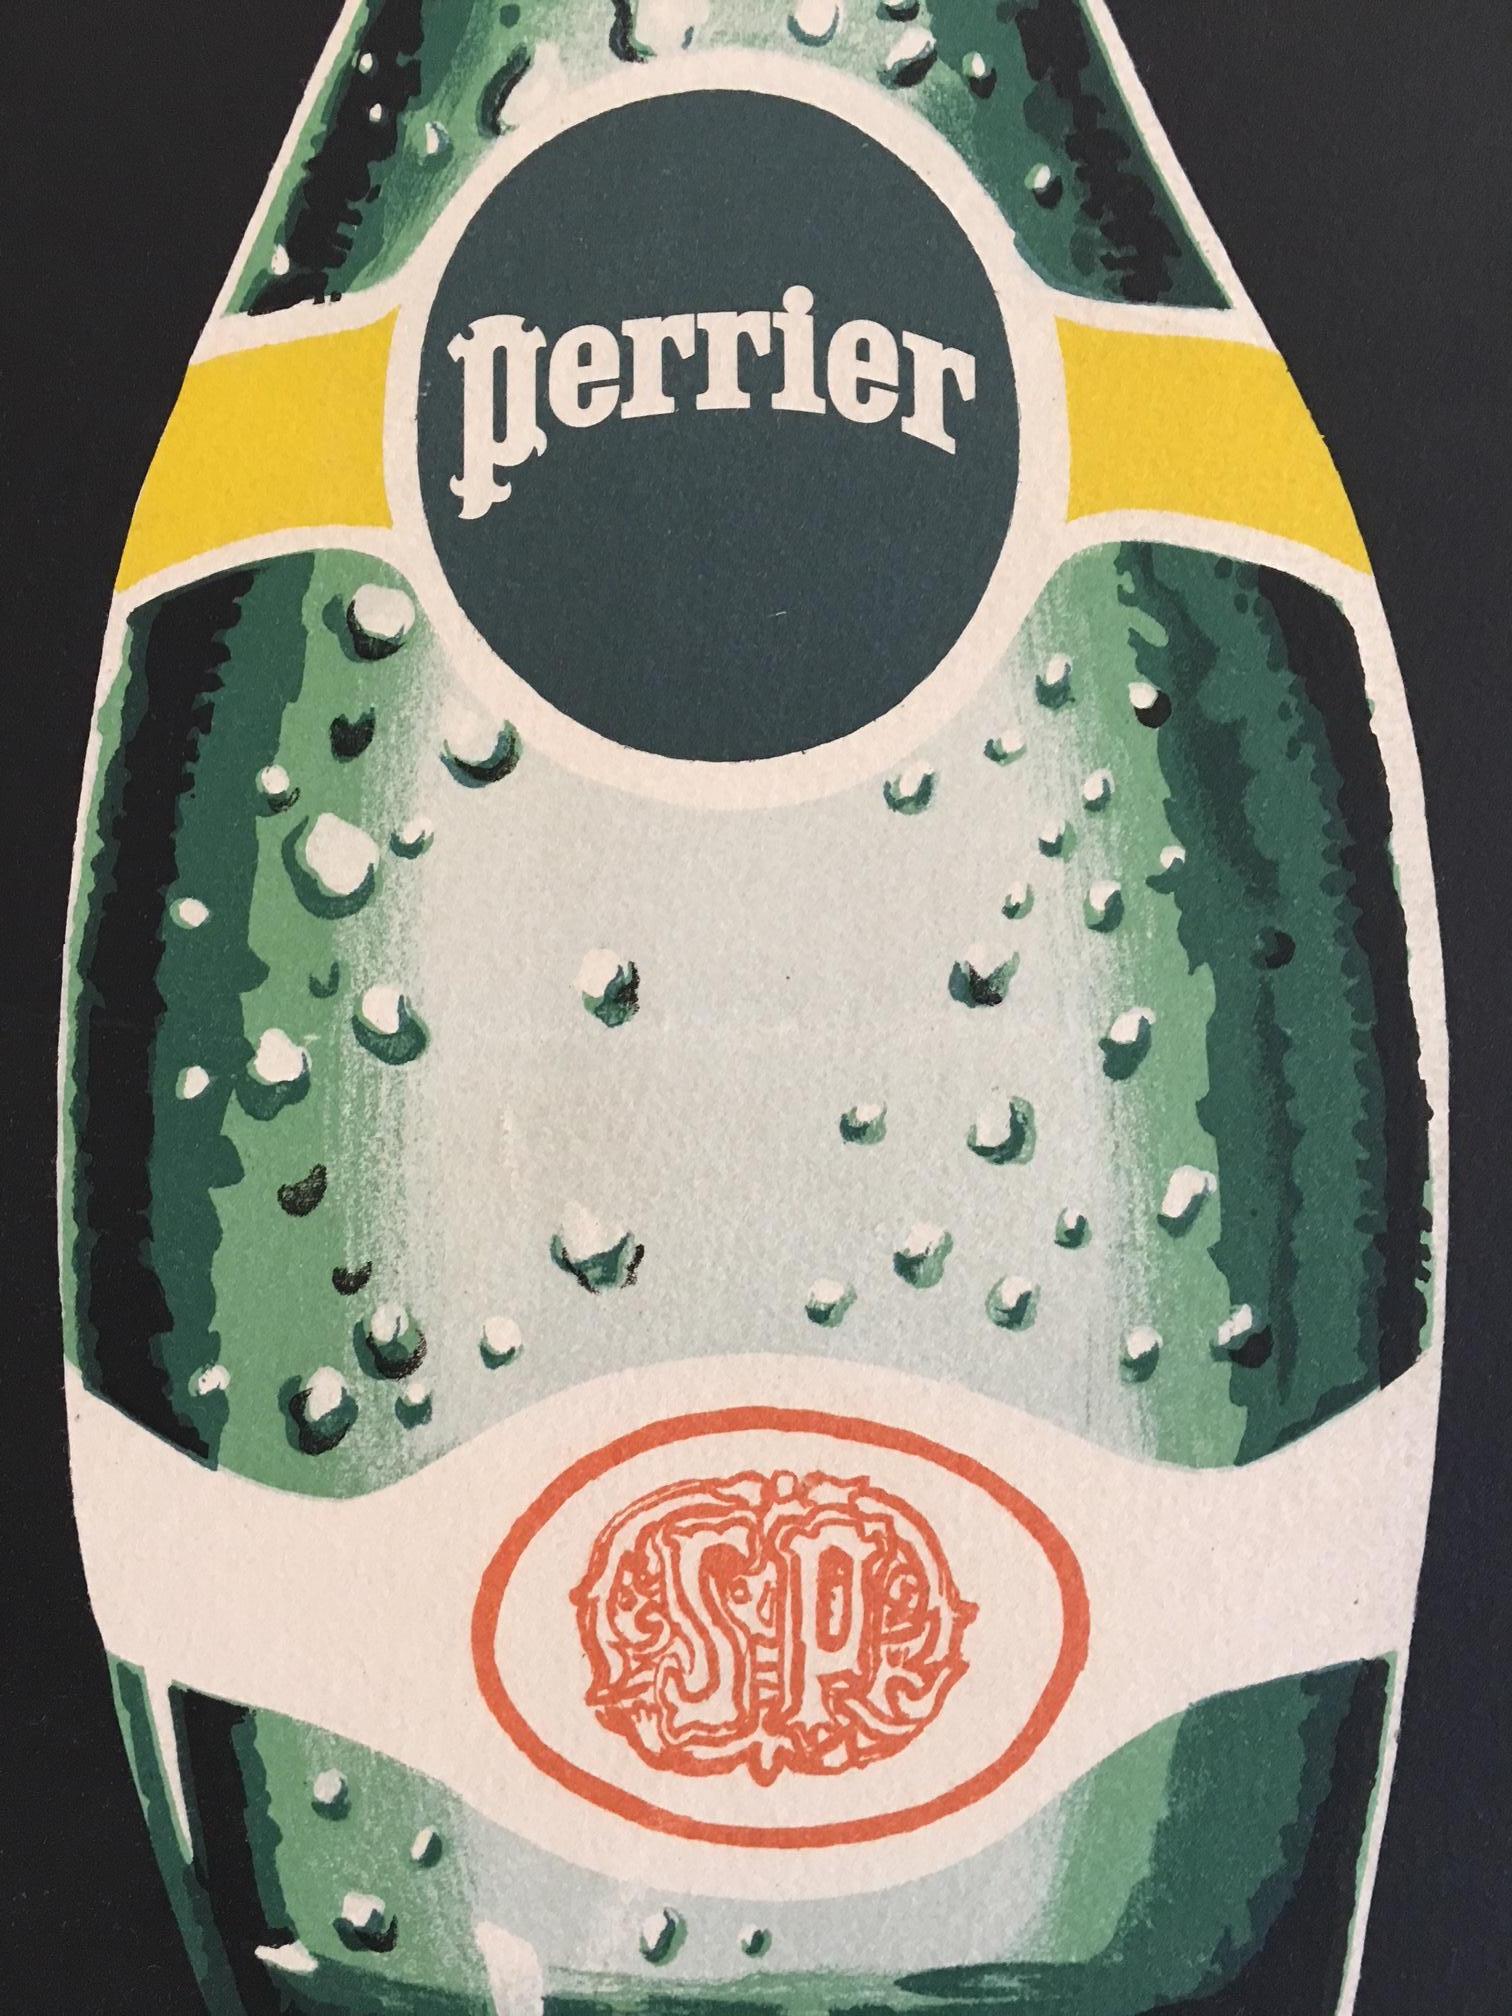 Modern Original Vintage Poster, Perrier by the Beach by Villemot, 1982 French Poster